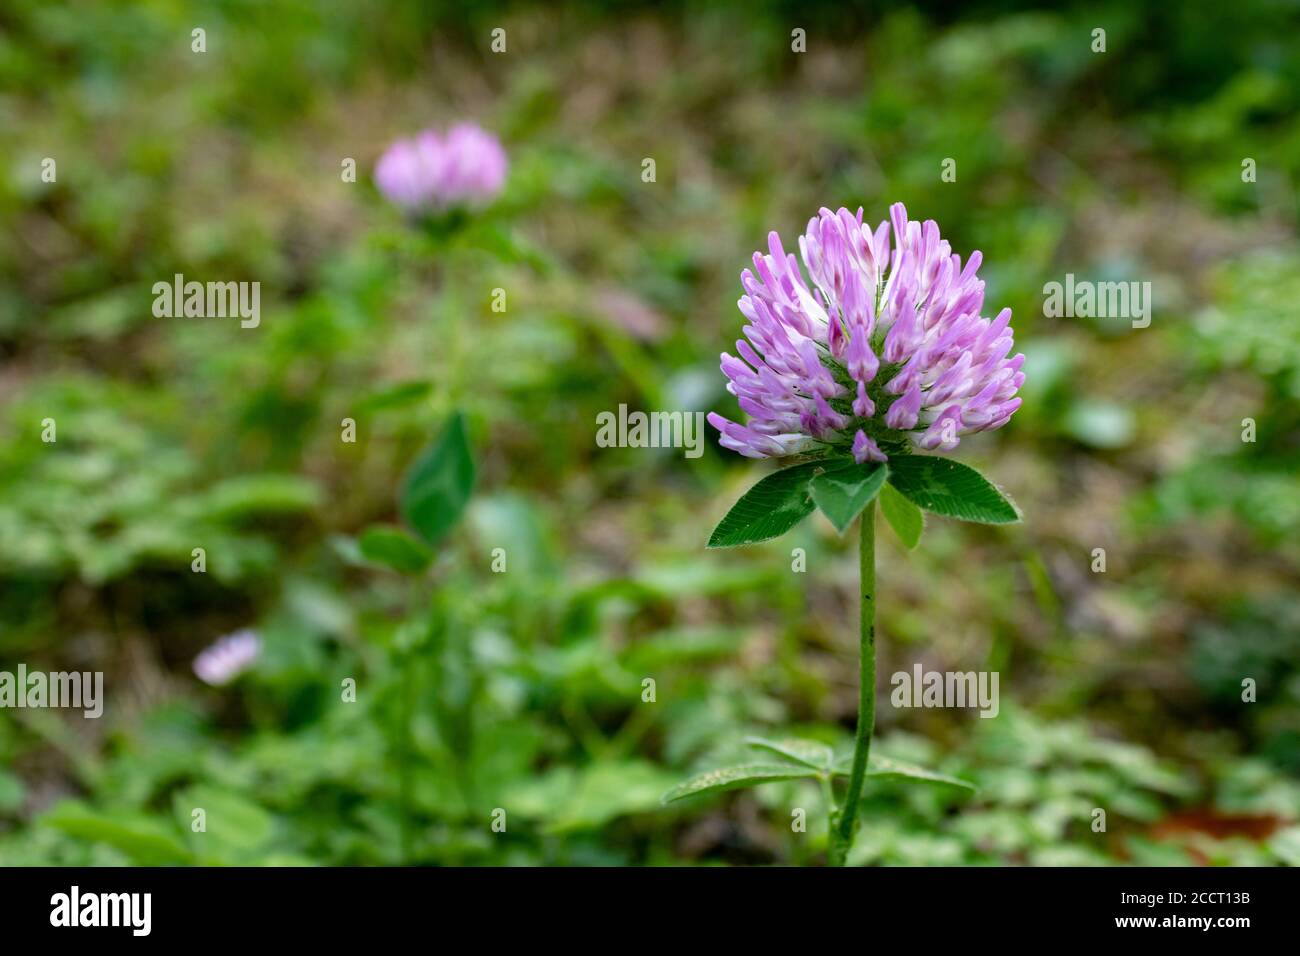 Soft focus of red clover flower (Trifolium pratense) against a blurry background Stock Photo